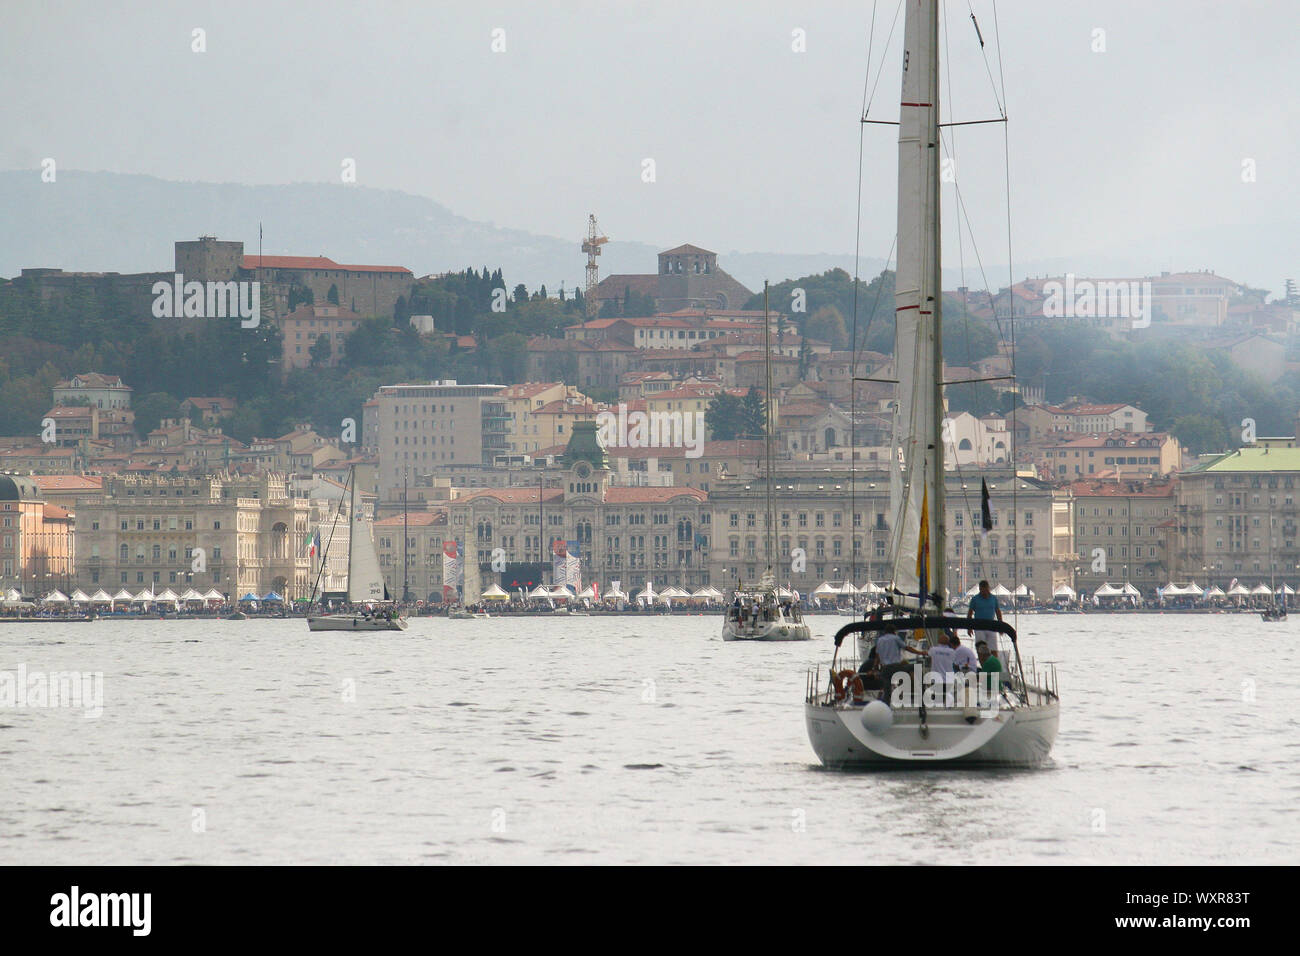 The Barcolana is a historic international sailing regatta taking place every year in the Gulf of Trieste on the second Sunday of October. Stock Photo